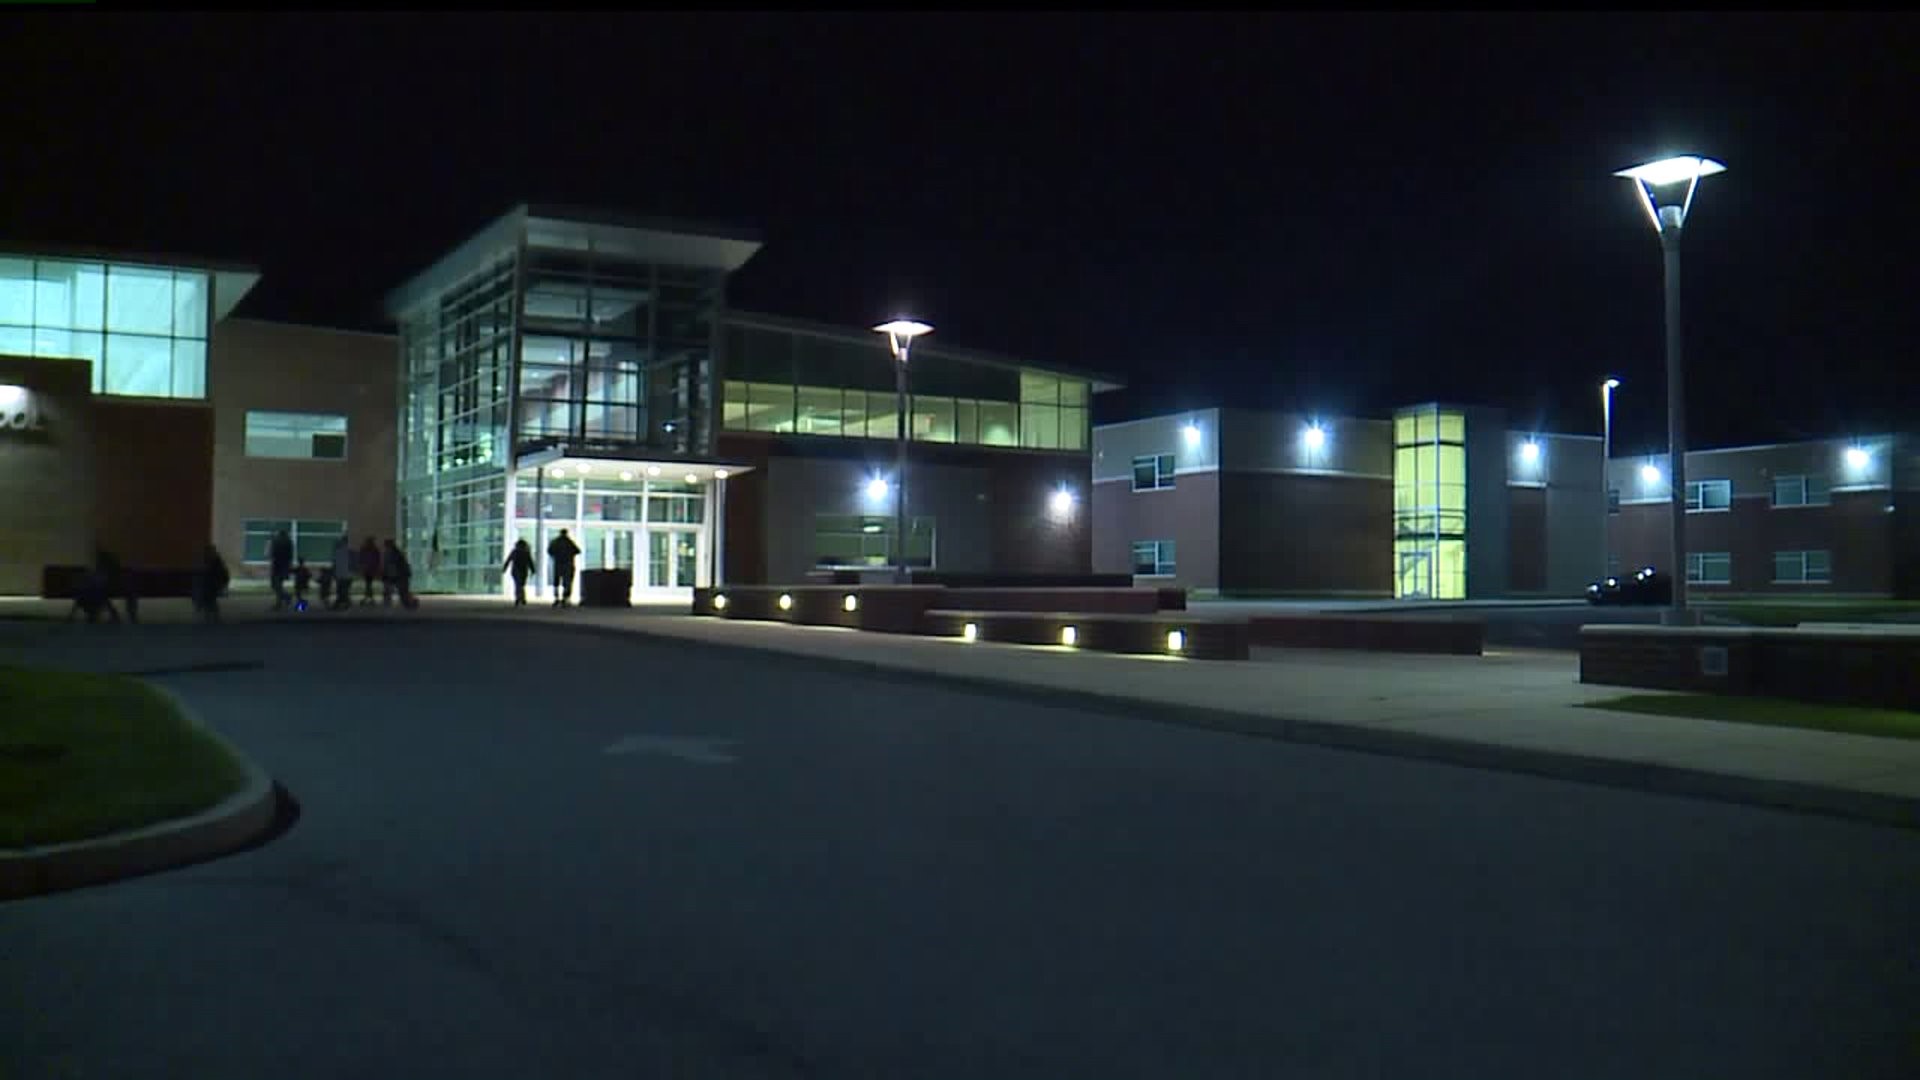 Spring Grove Area school district responds to rumored threats